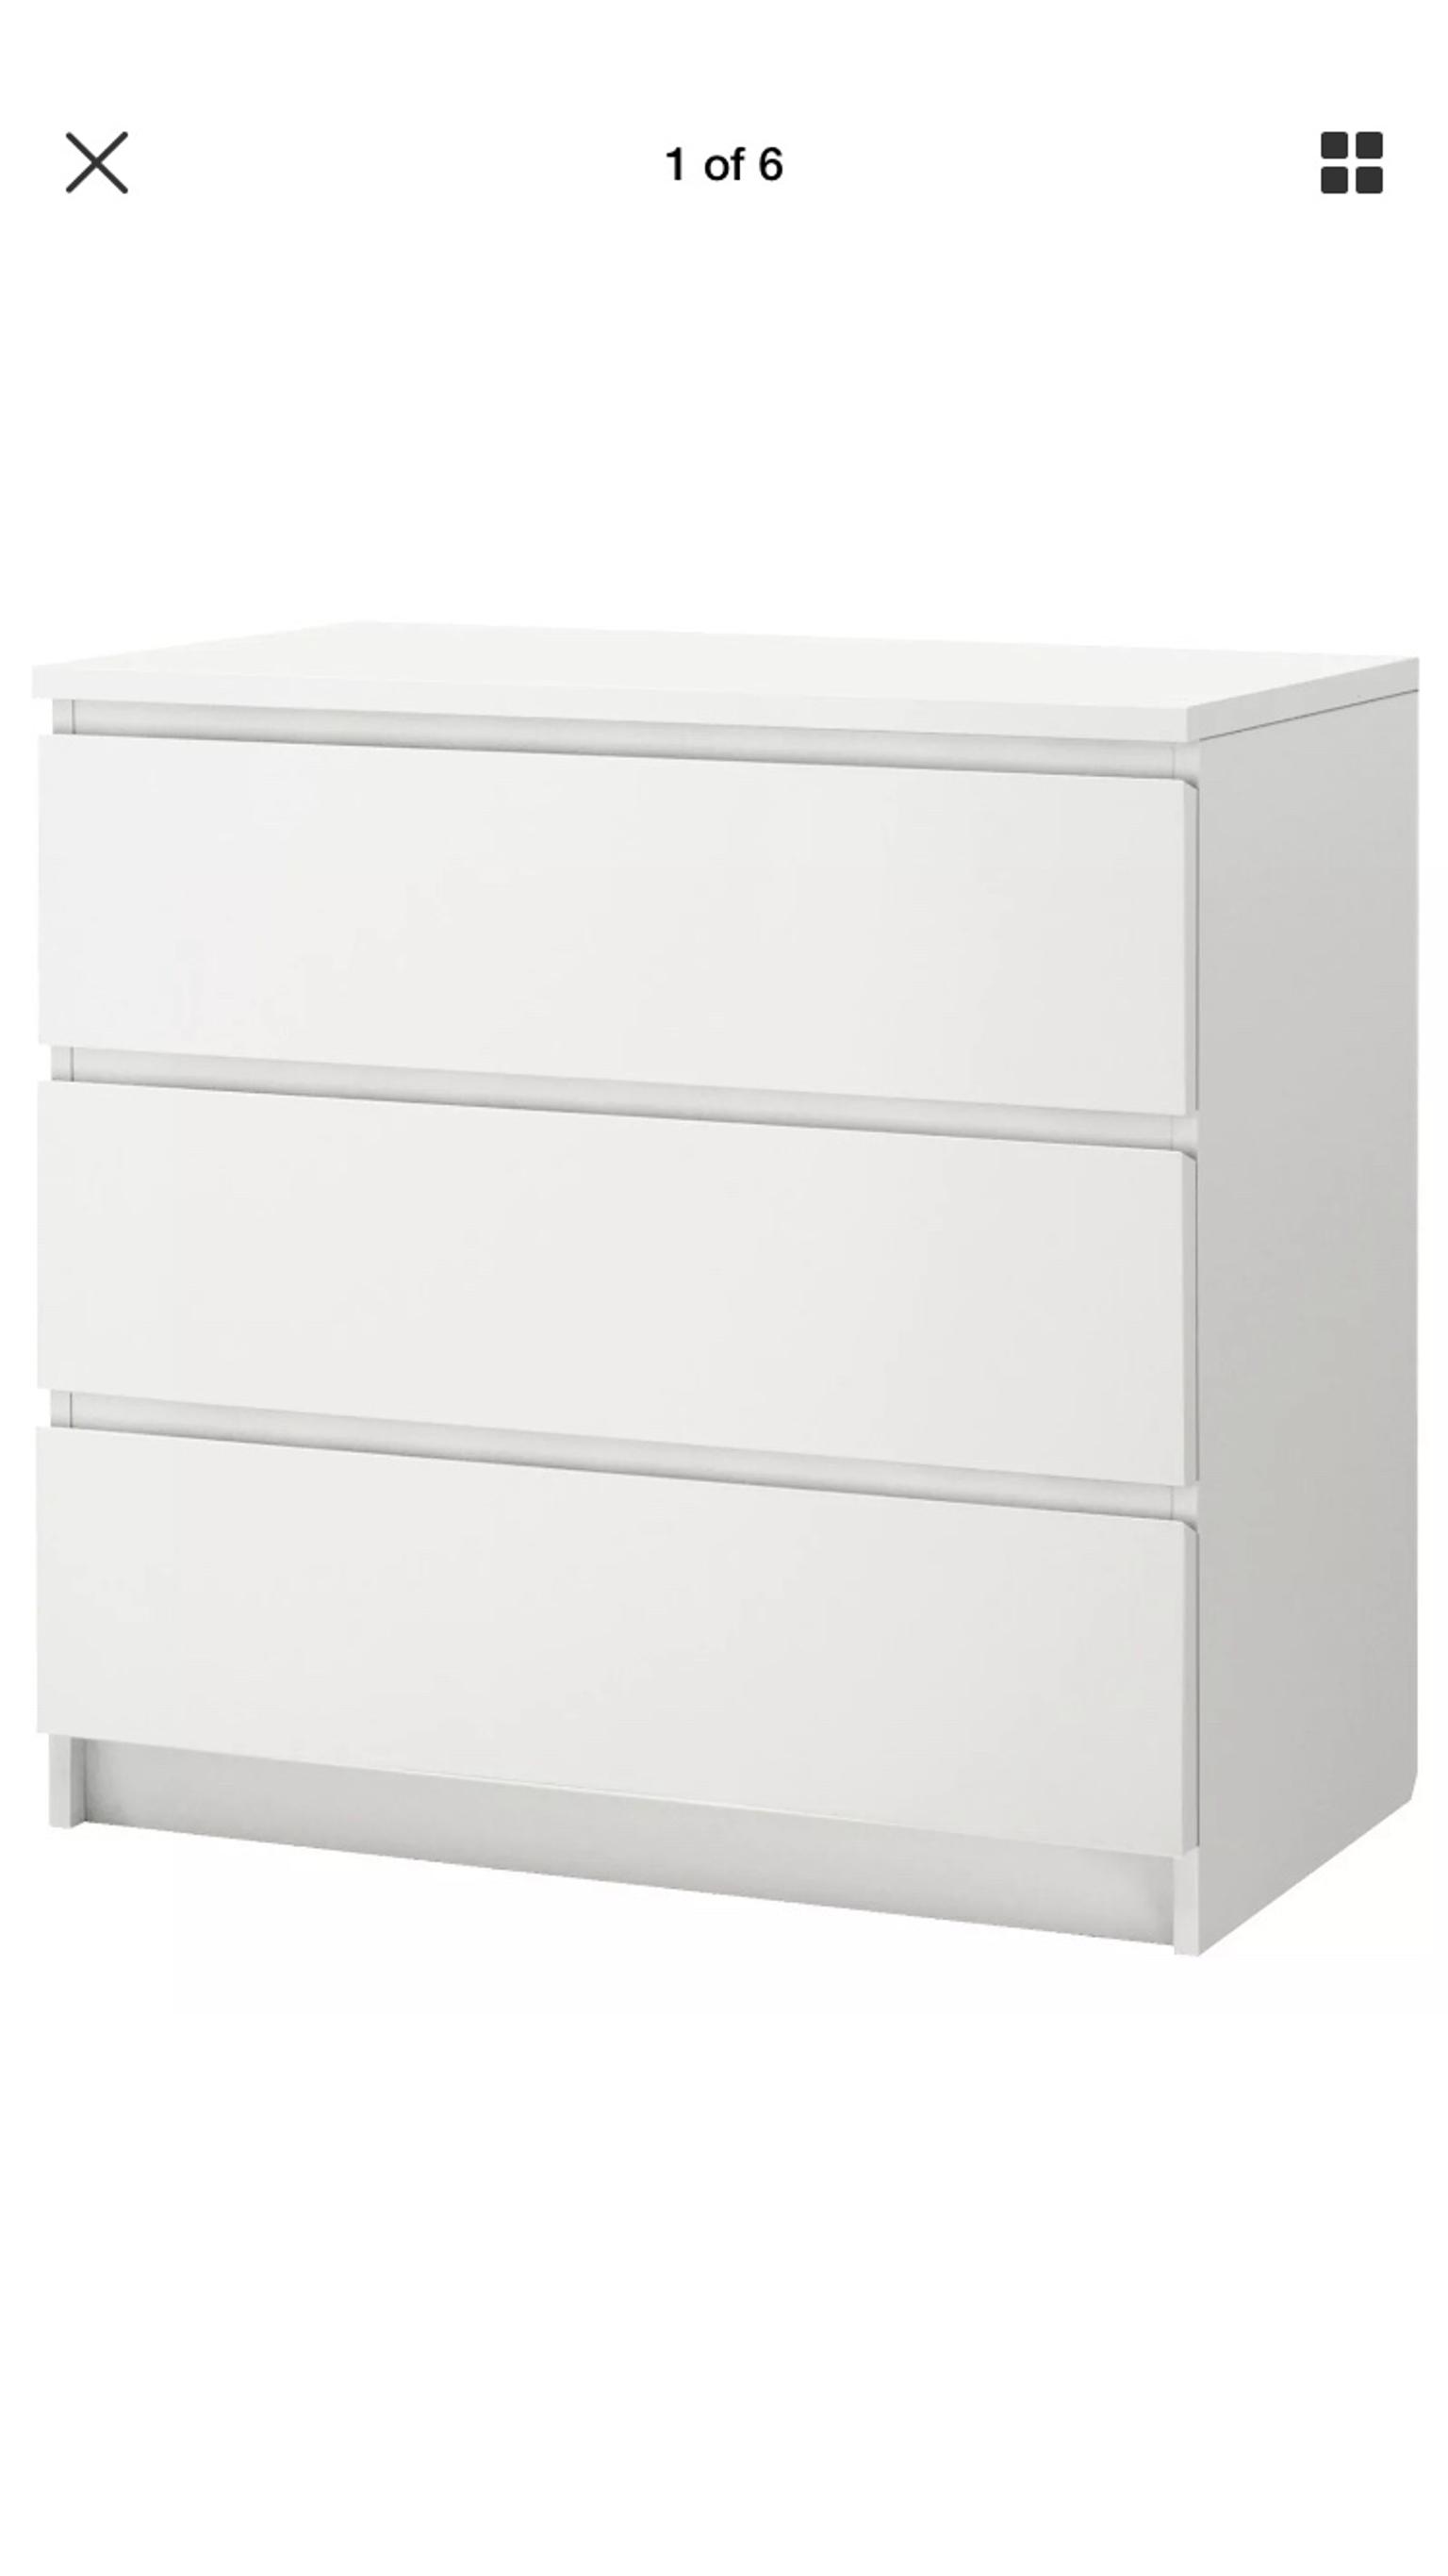 Ikea Malm 3 Drawer Chest Of Drawers In Da16 London For 15 00 For